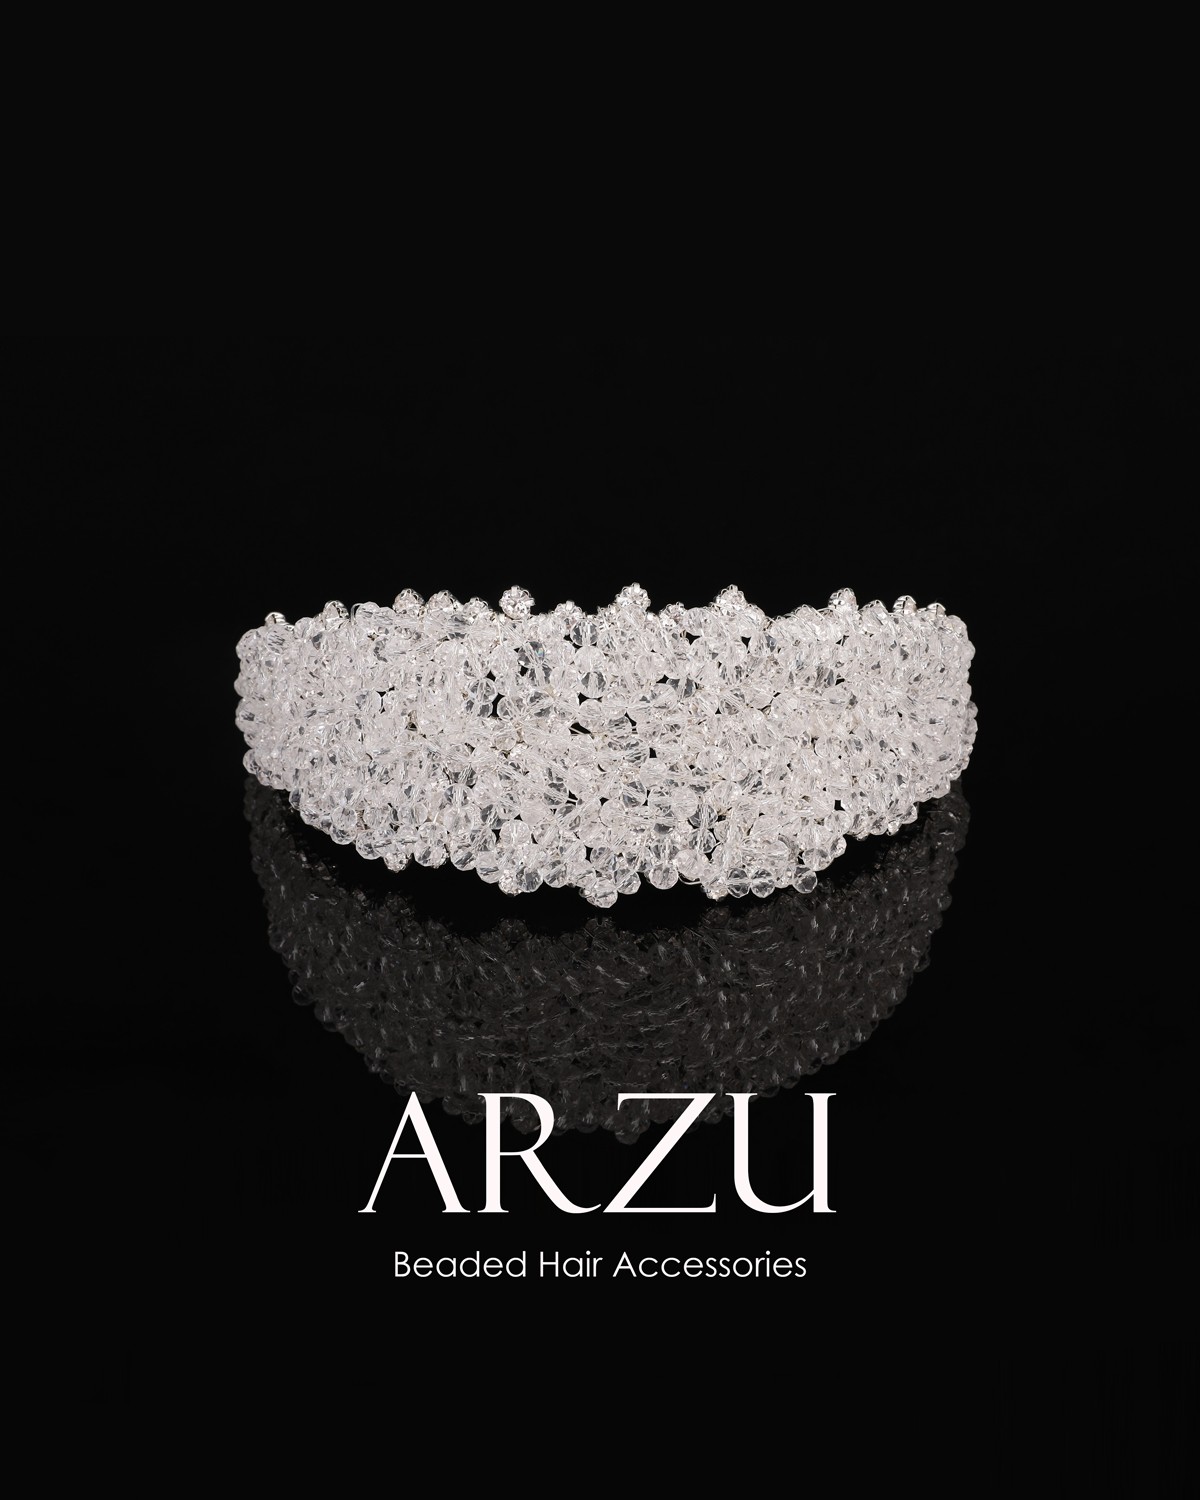 Arzu Zircon Stone And Crystal Beaded Hair Accessories Buy Now.